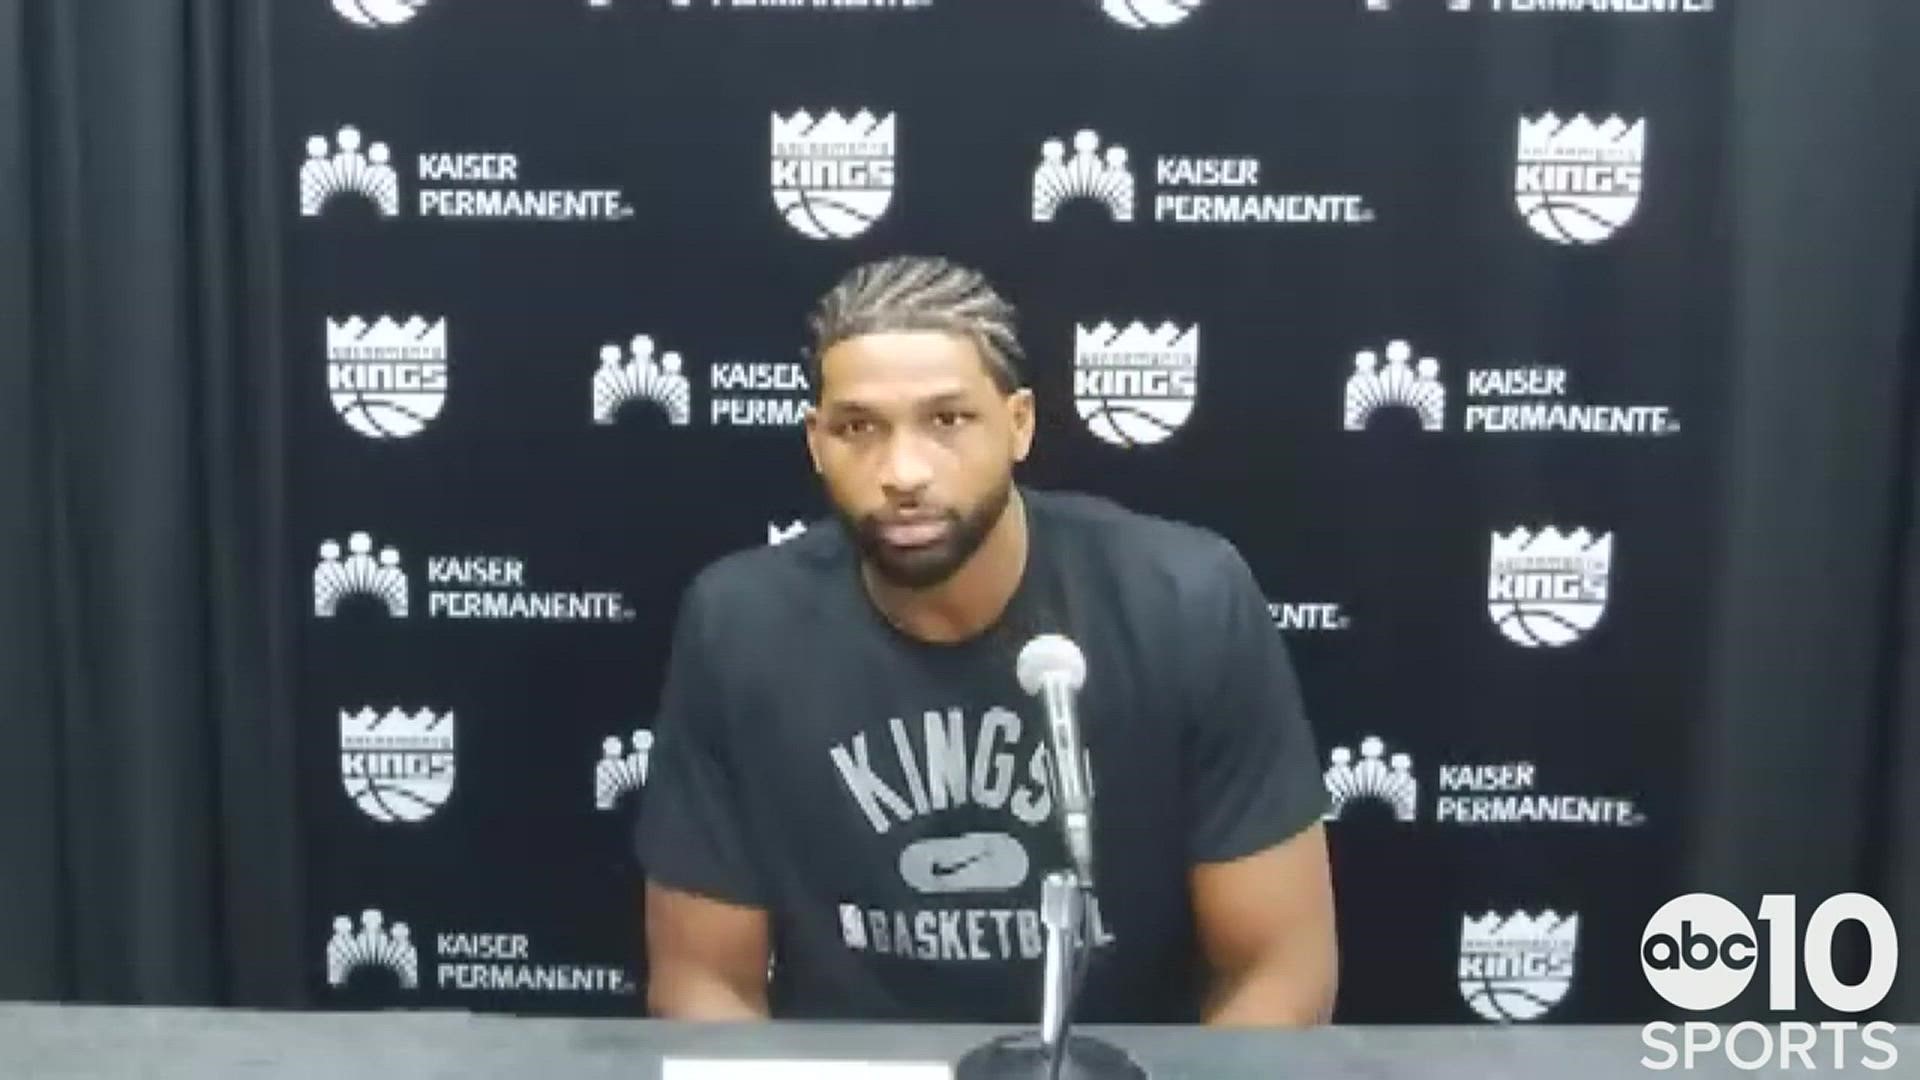 Following Wednesday's 107-97 loss to the Timberwolves, Kings center Tristan Thompson goes off on his Sacramento's missed opportunity - going 1-3 on the road trip.